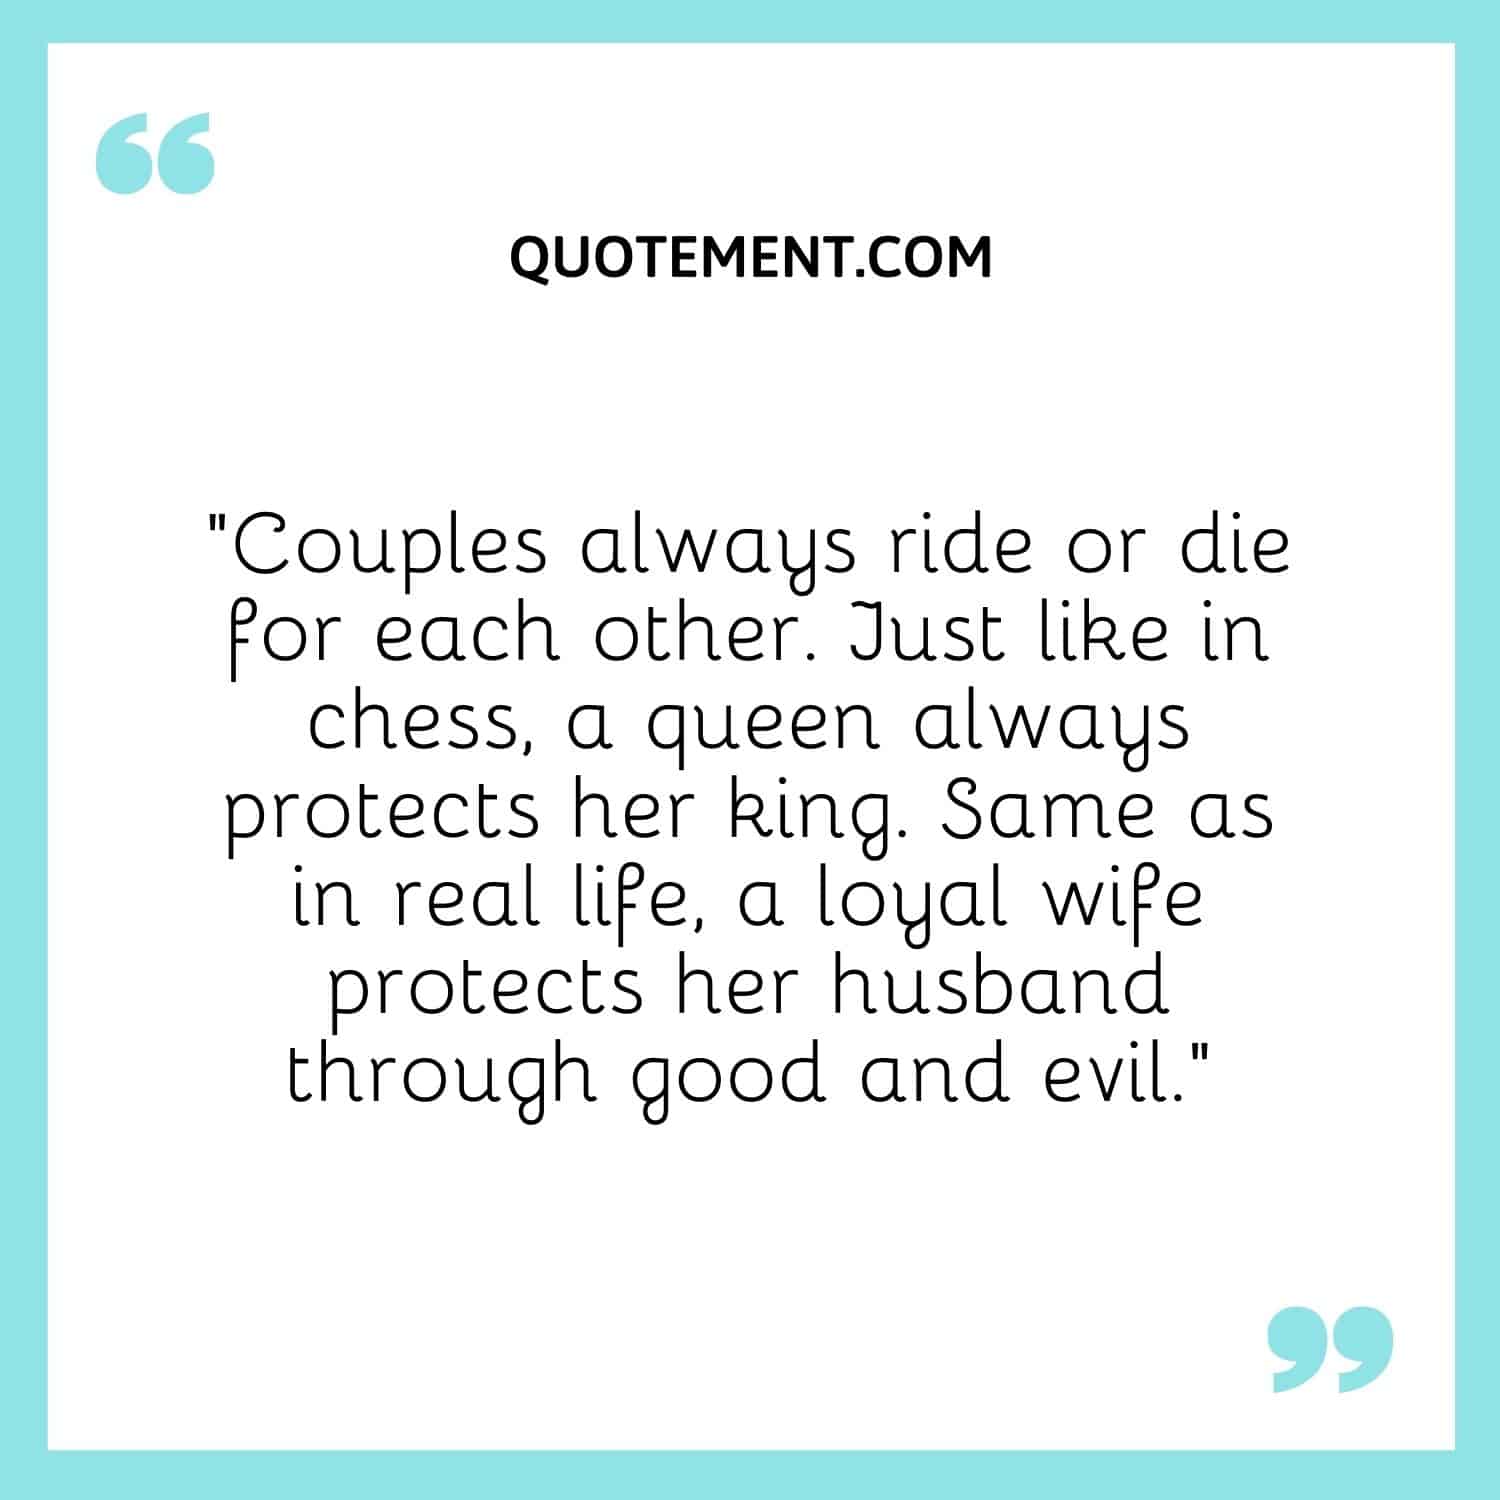 Couples always ride or die for each other. Just like in chess, a queen always protects her king. Same as in real life, a loyal wife protects her husband through good and evil.